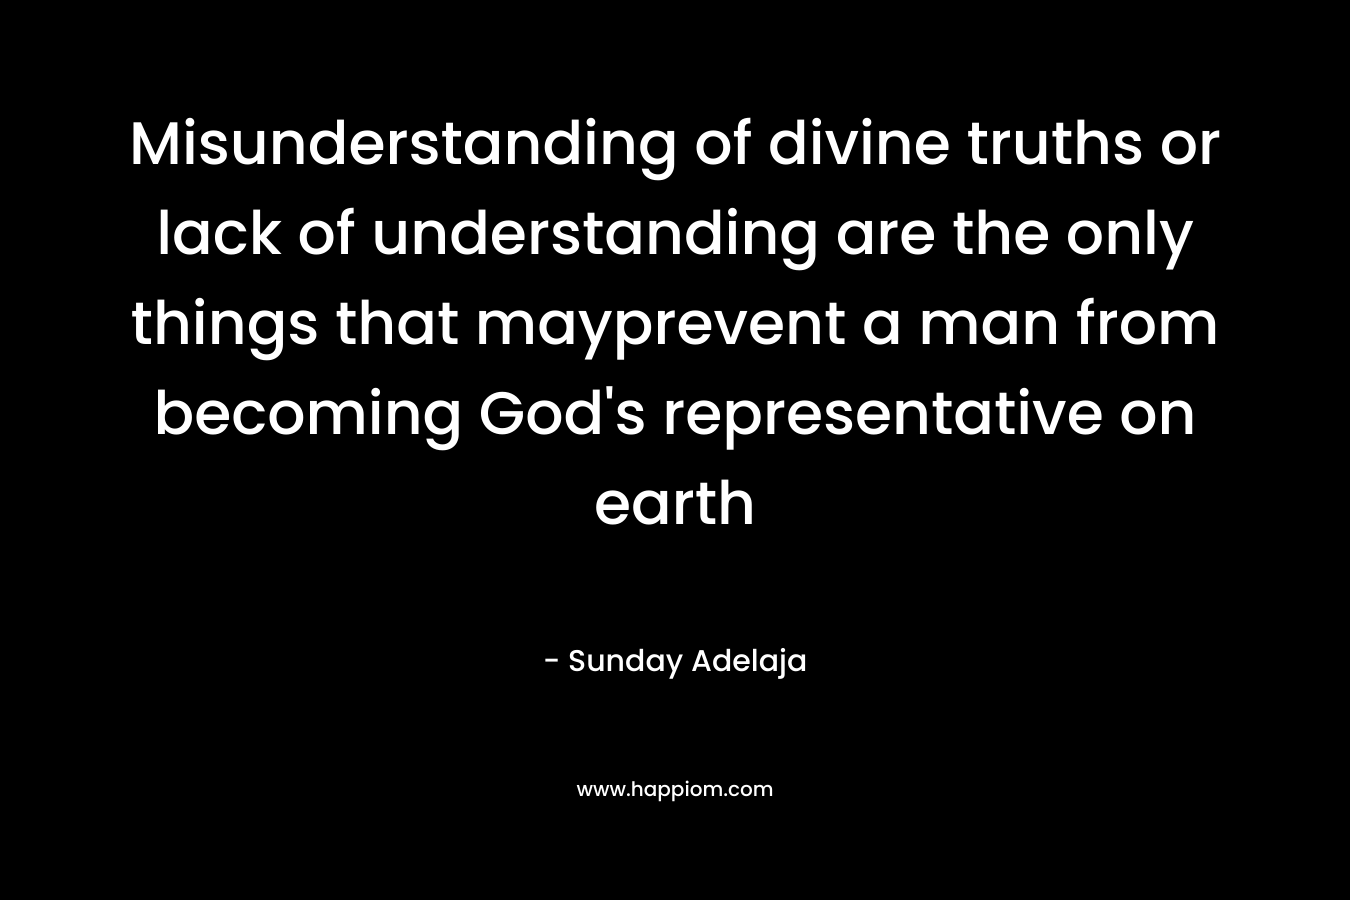 Misunderstanding of divine truths or lack of understanding are the only things that mayprevent a man from becoming God’s representative on earth – Sunday Adelaja